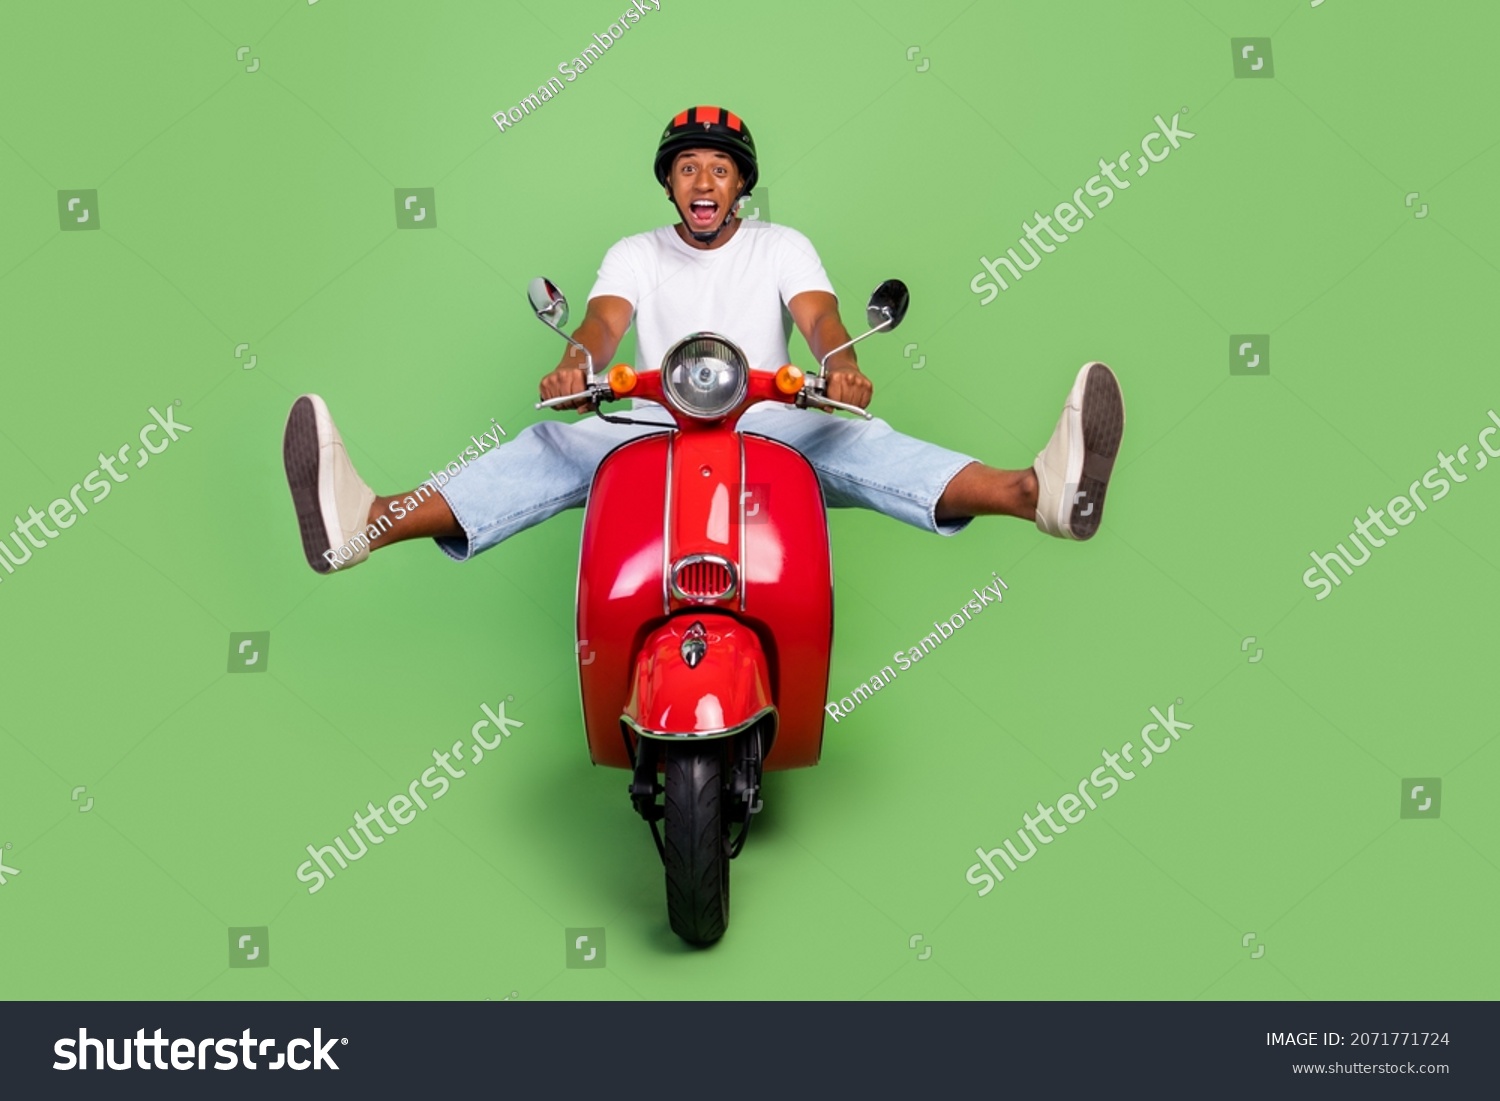 29,535 Motorcycle fun background Images, Stock Photos & Vectors ...